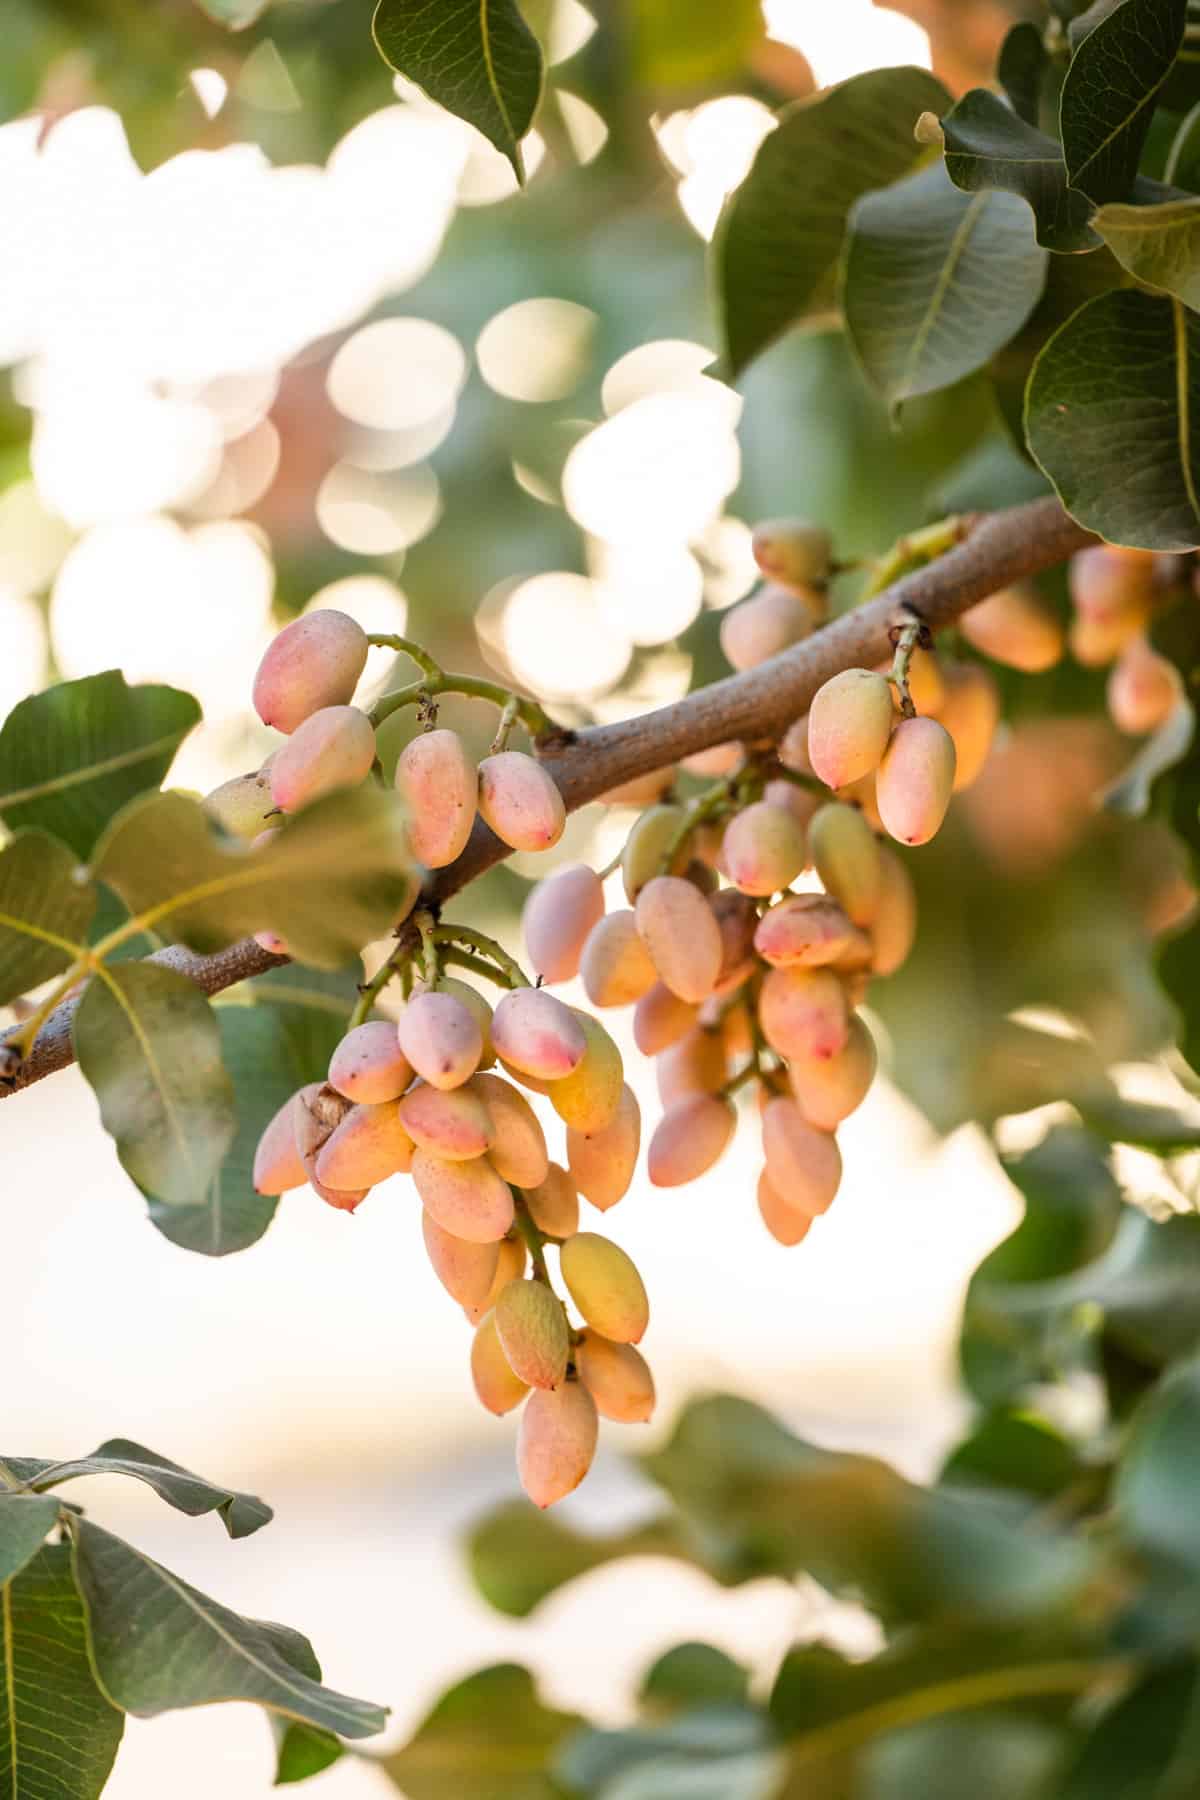 What is a Pistachio Nut and How Are They Harvested?